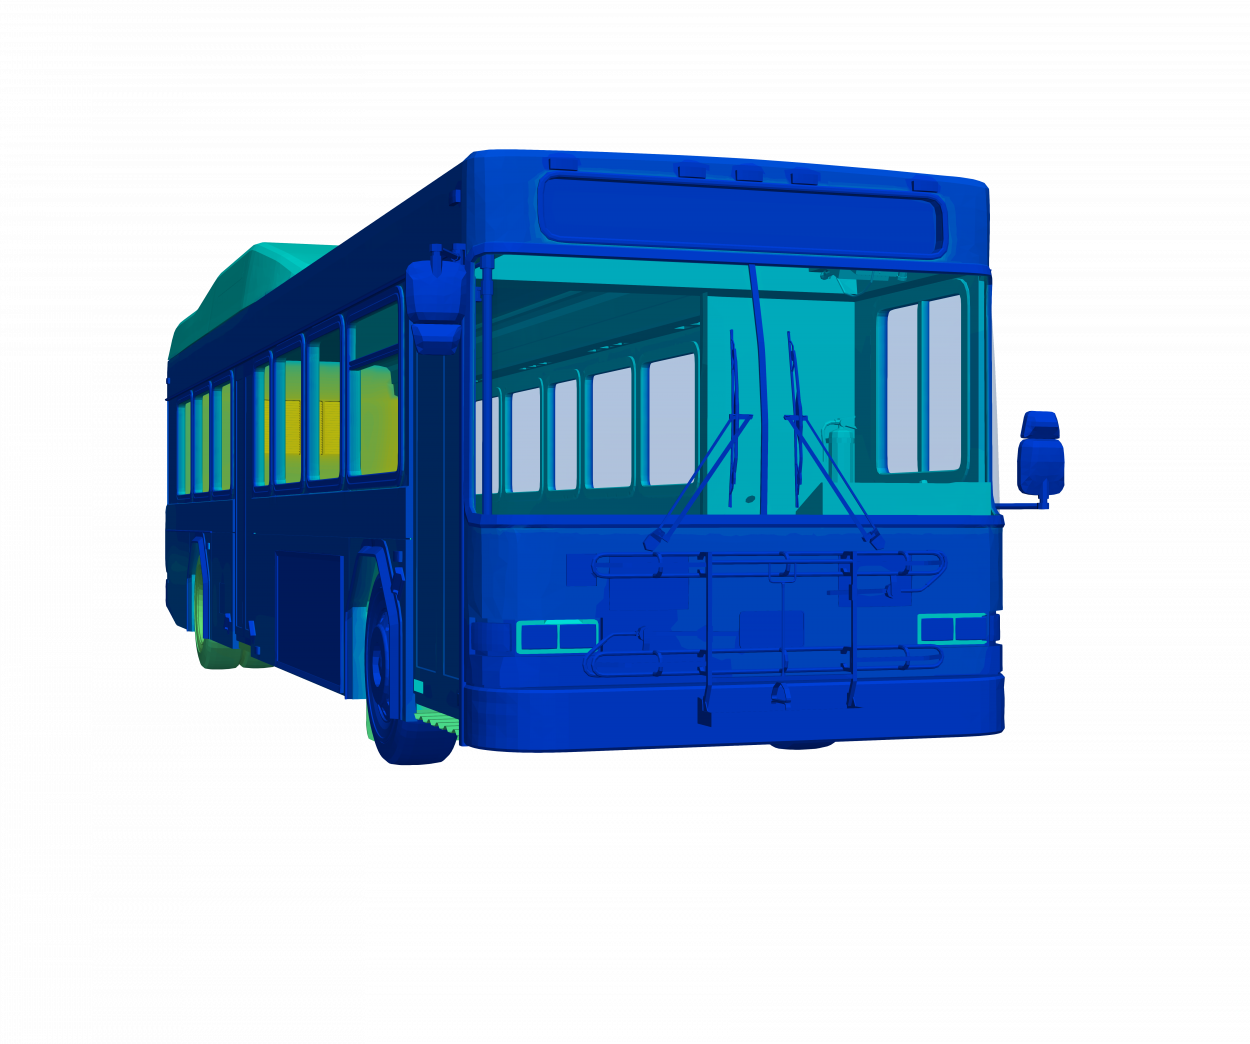 thermal simulation model city bus cool cabin from front